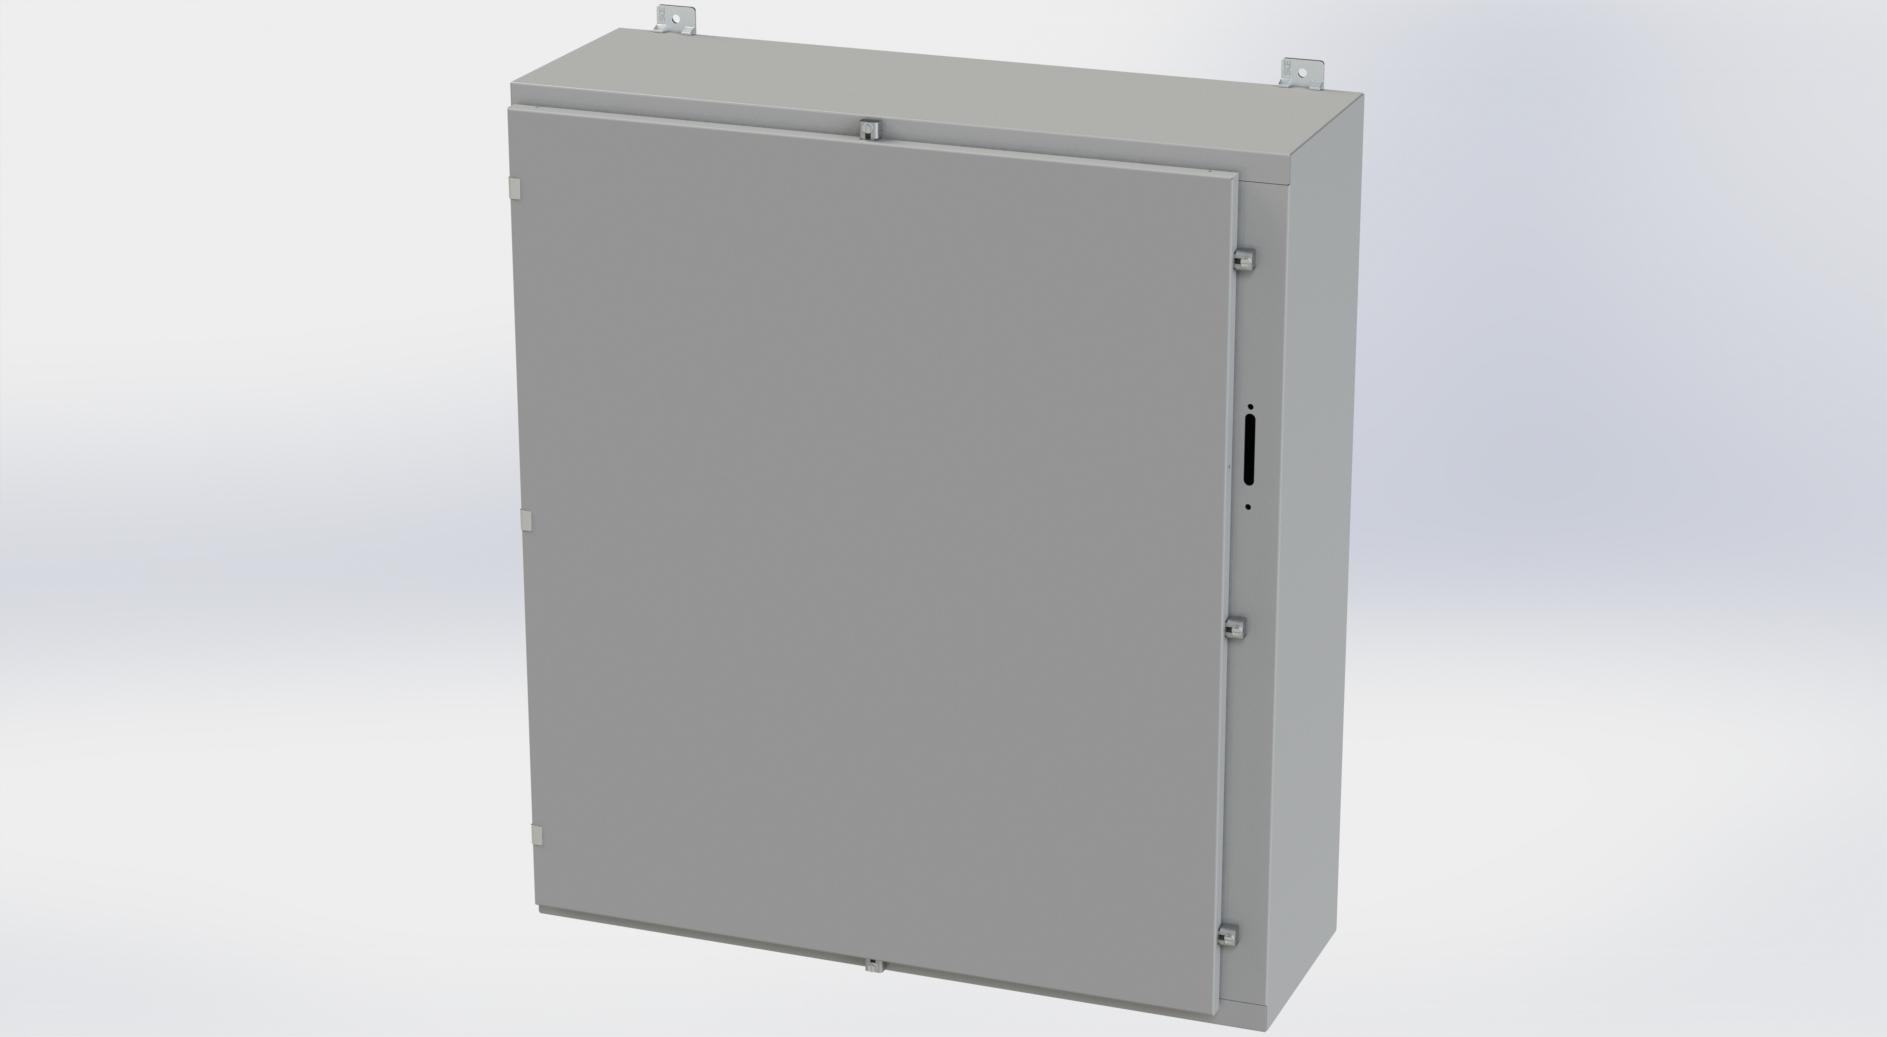 Saginaw Control SCE-42HS3712LP HS LP Enclosure, Height:42.00", Width:37.38", Depth:12.00", ANSI-61 gray powder coating inside and out. Optional sub-panels are powder coated white.